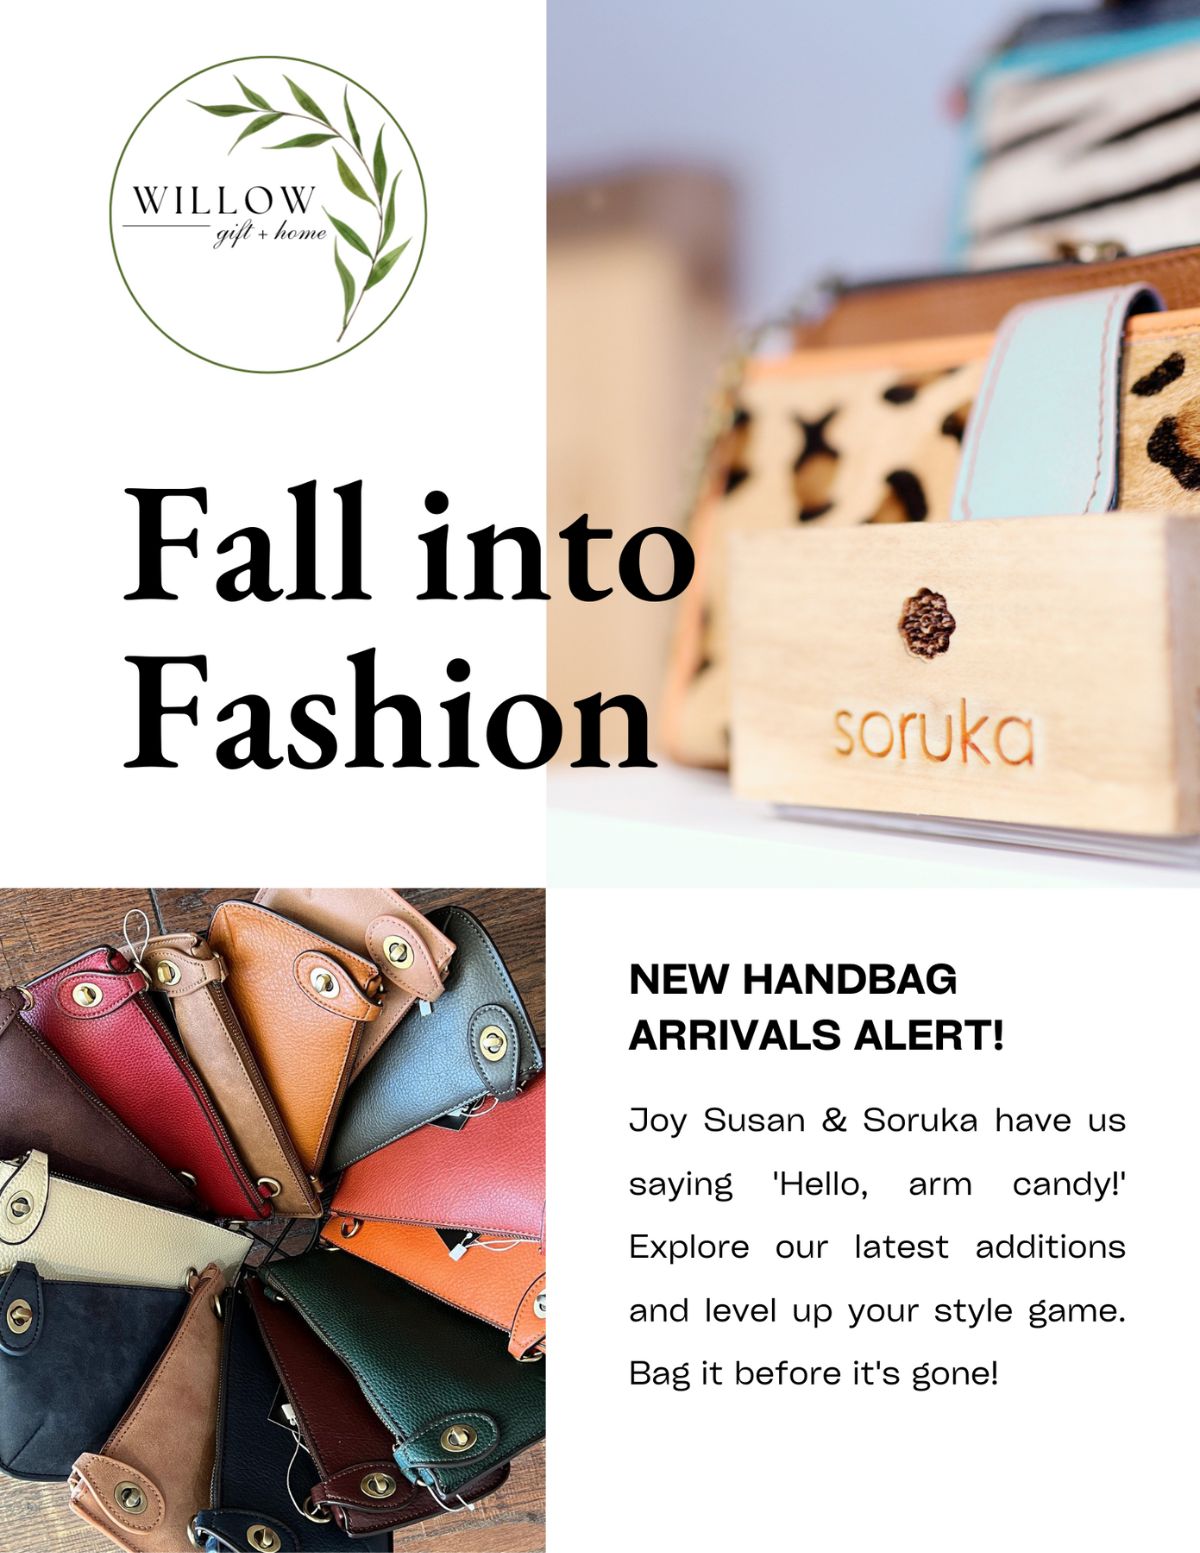 Fall Into Fashion at Willow Gift & Home